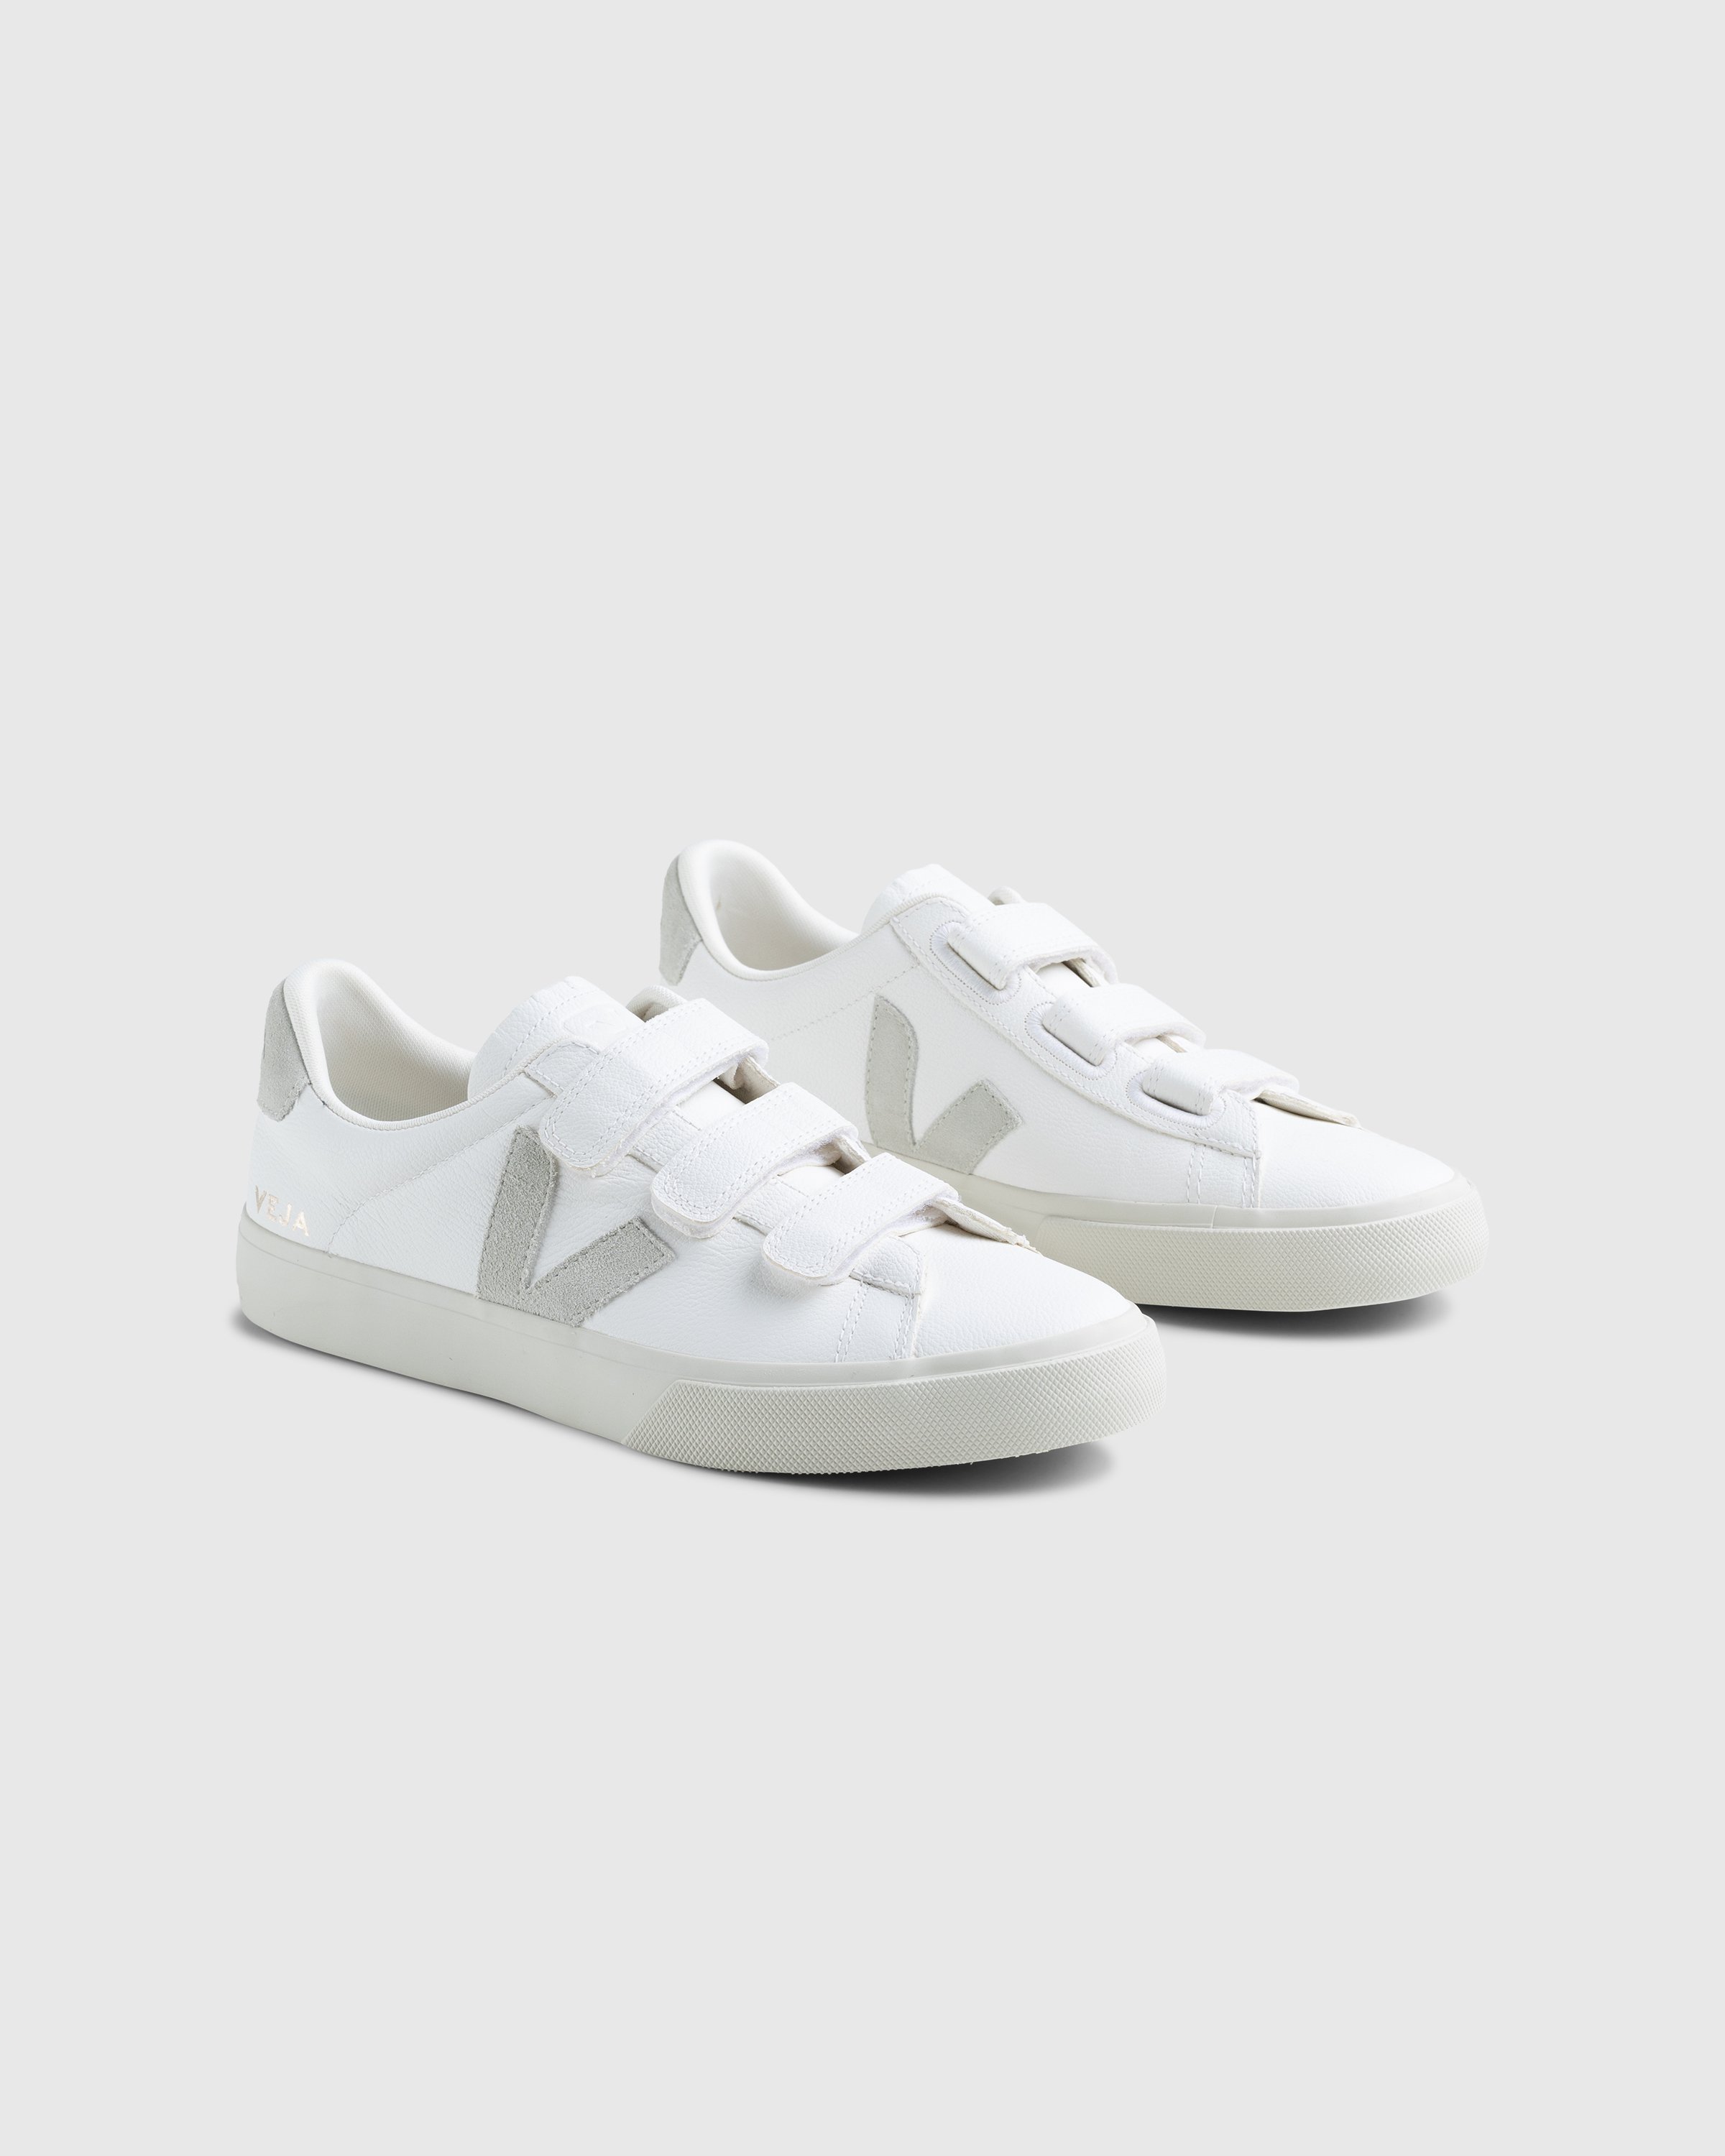 VEJA - Recife Chrome-Free Leather White/Natural - Footwear - White - Image 3